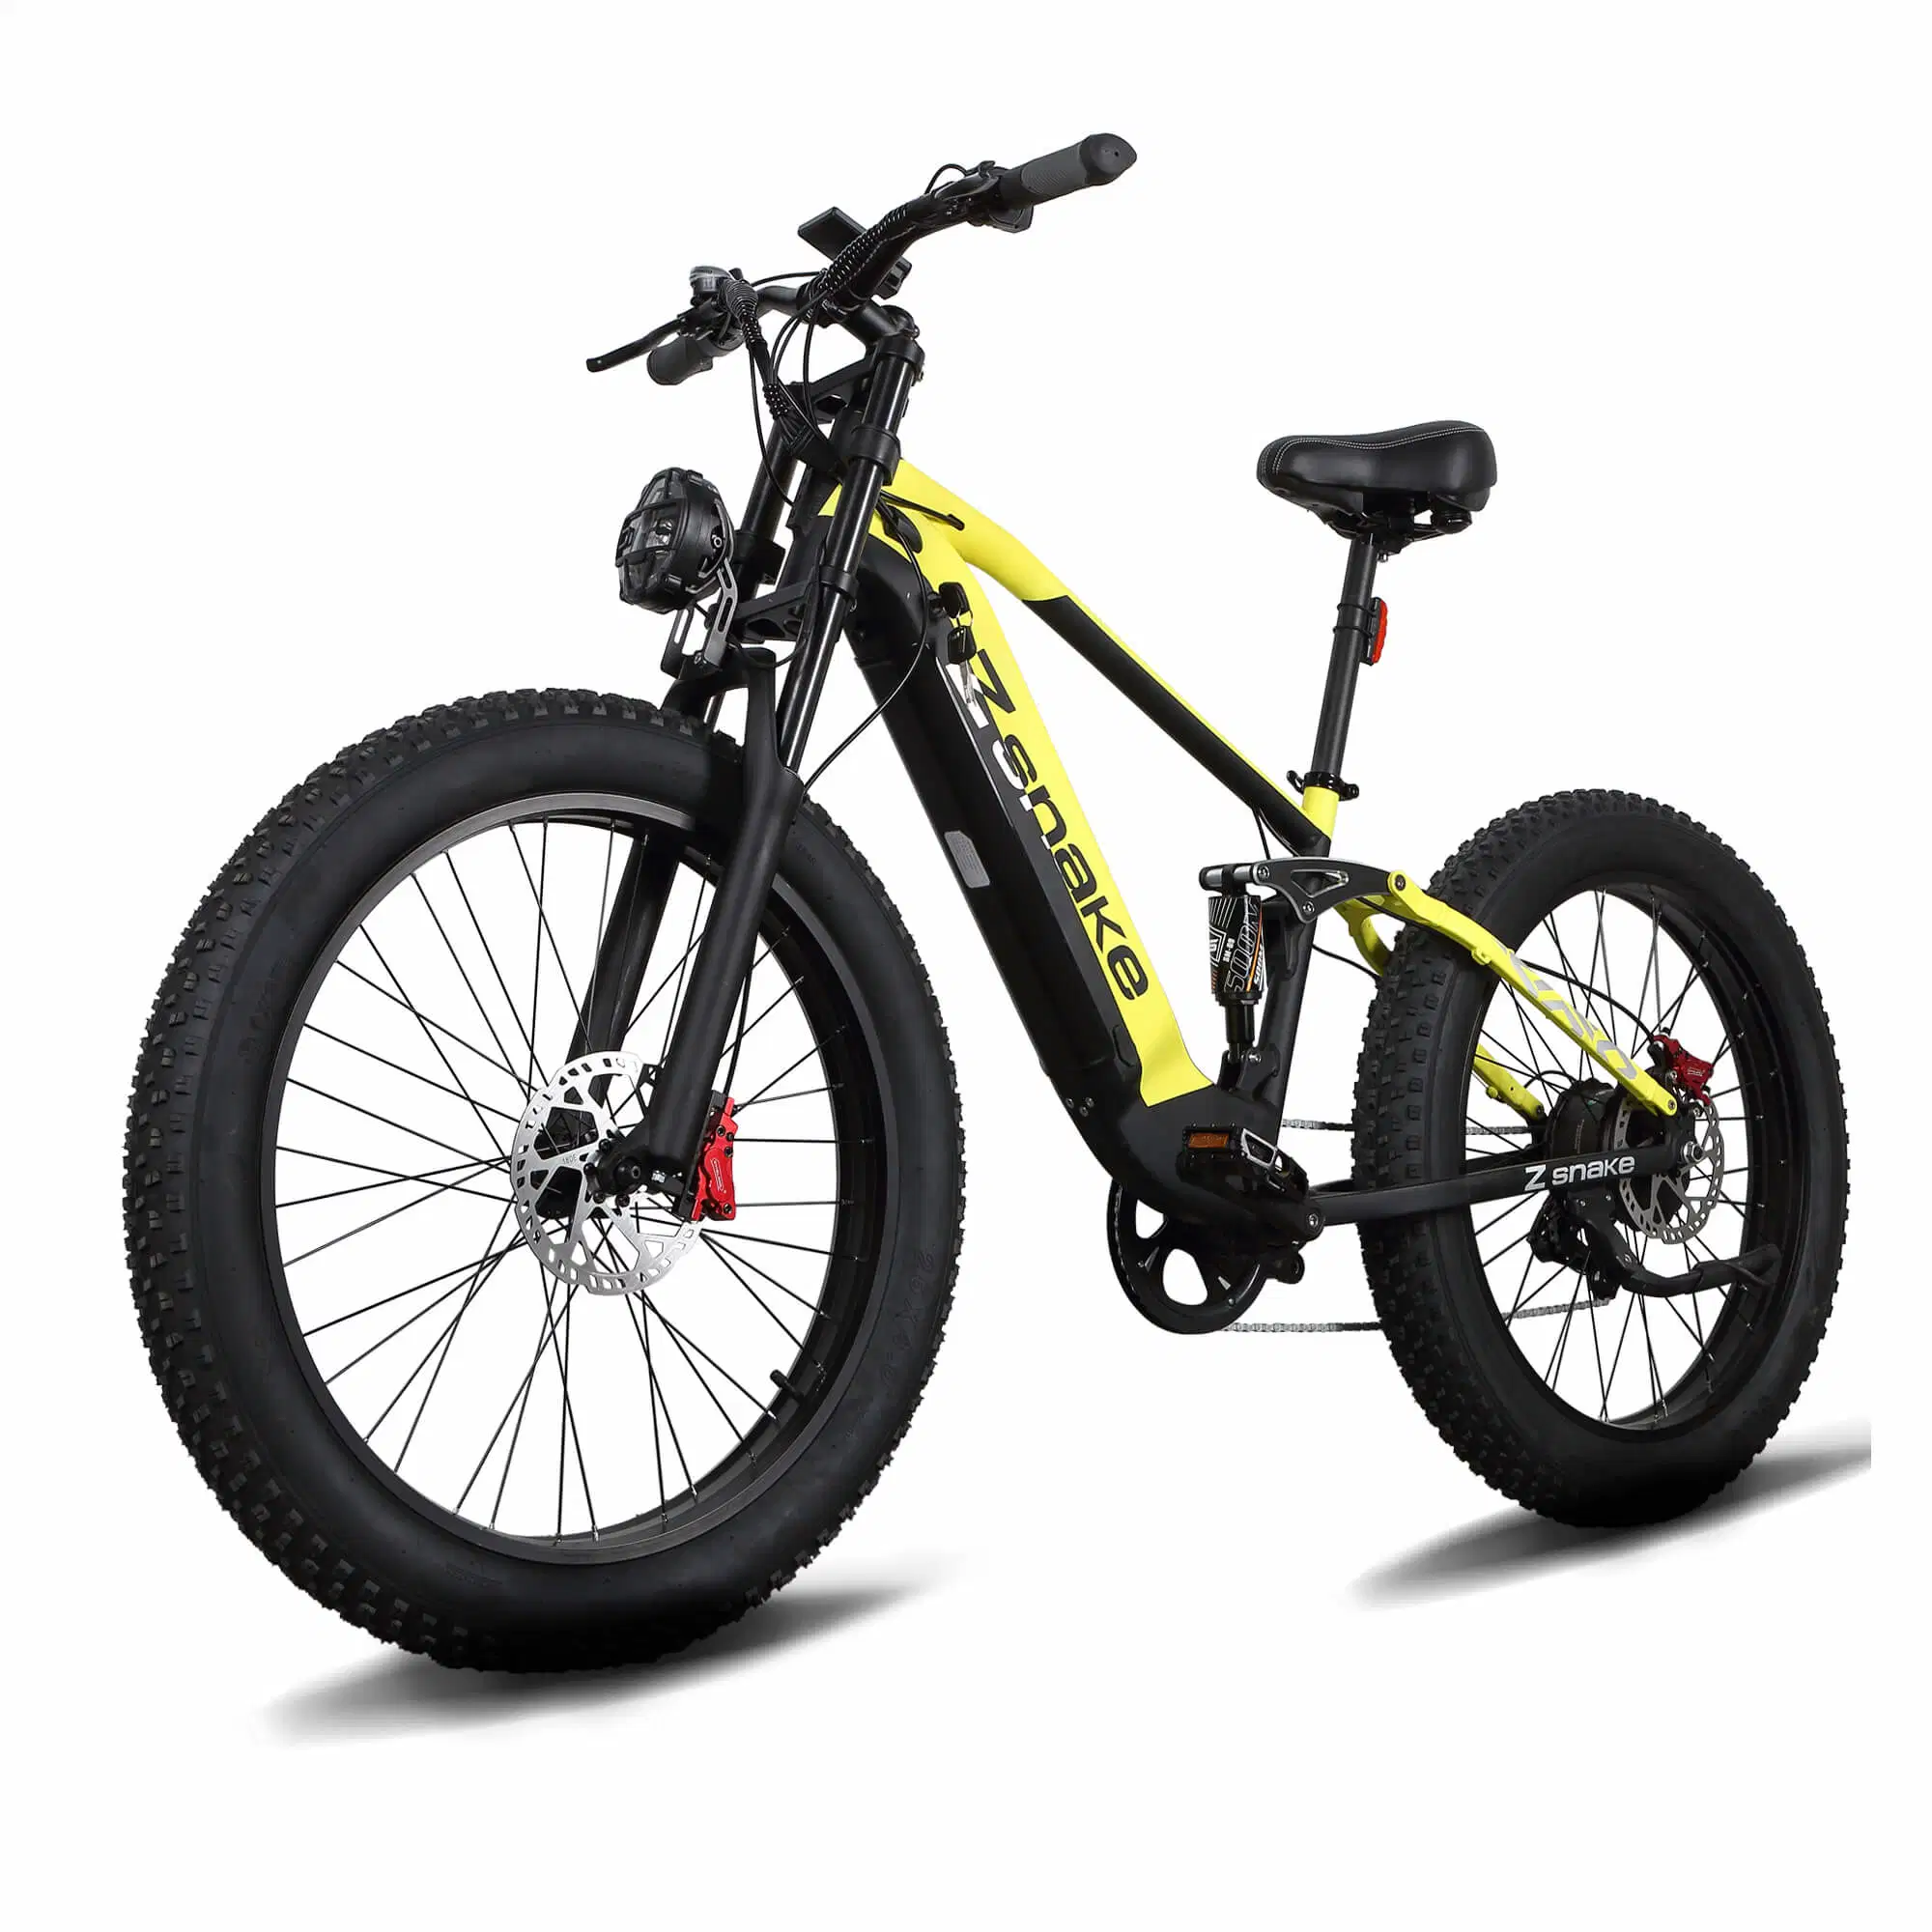 Zsnake 750W Fast Electric Bike for Adults 30 Mph 48V 20A Lithium Cell 26 Inch Fat Road Vacuum Tires and LED Display